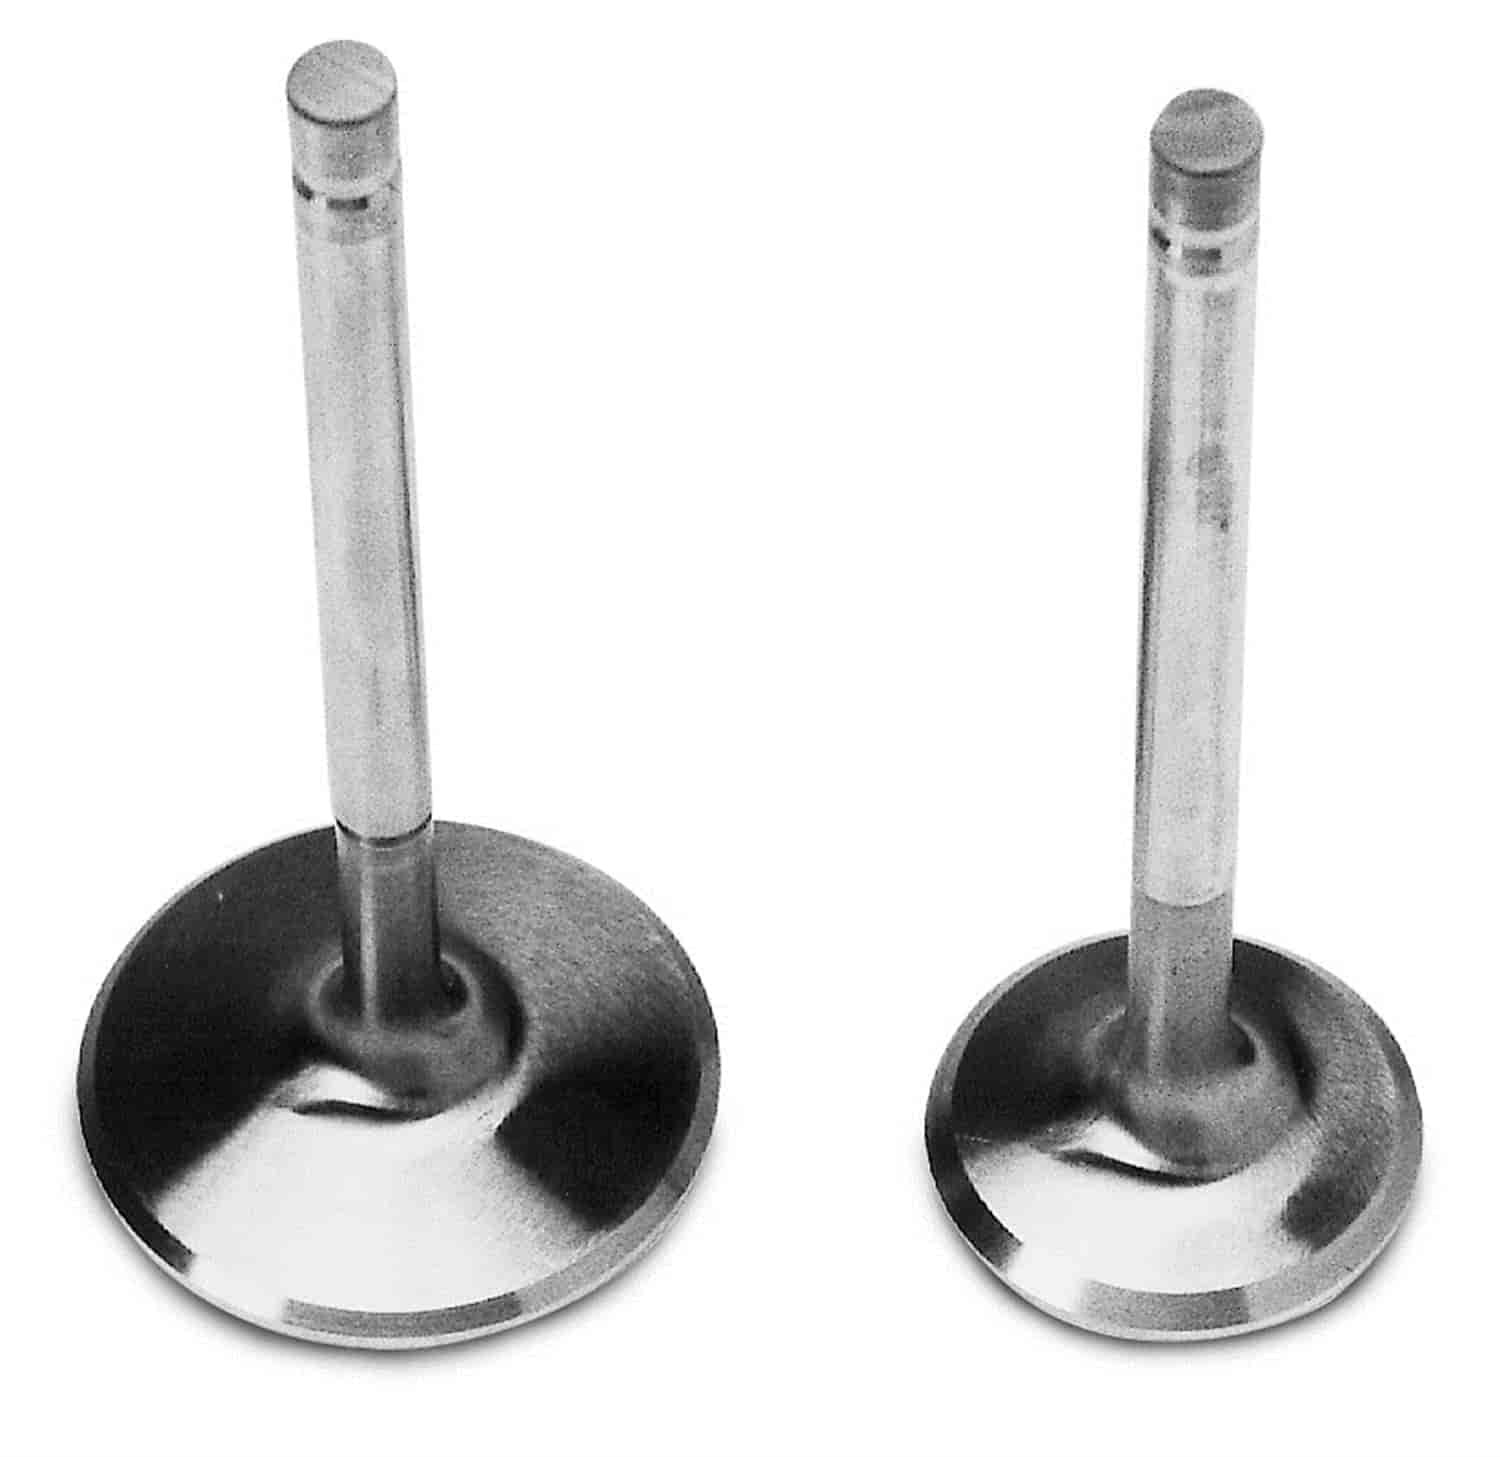 Intake Valve Set 2.30" for Big Block Chevy Victor 24 Degree Heads #350-77409